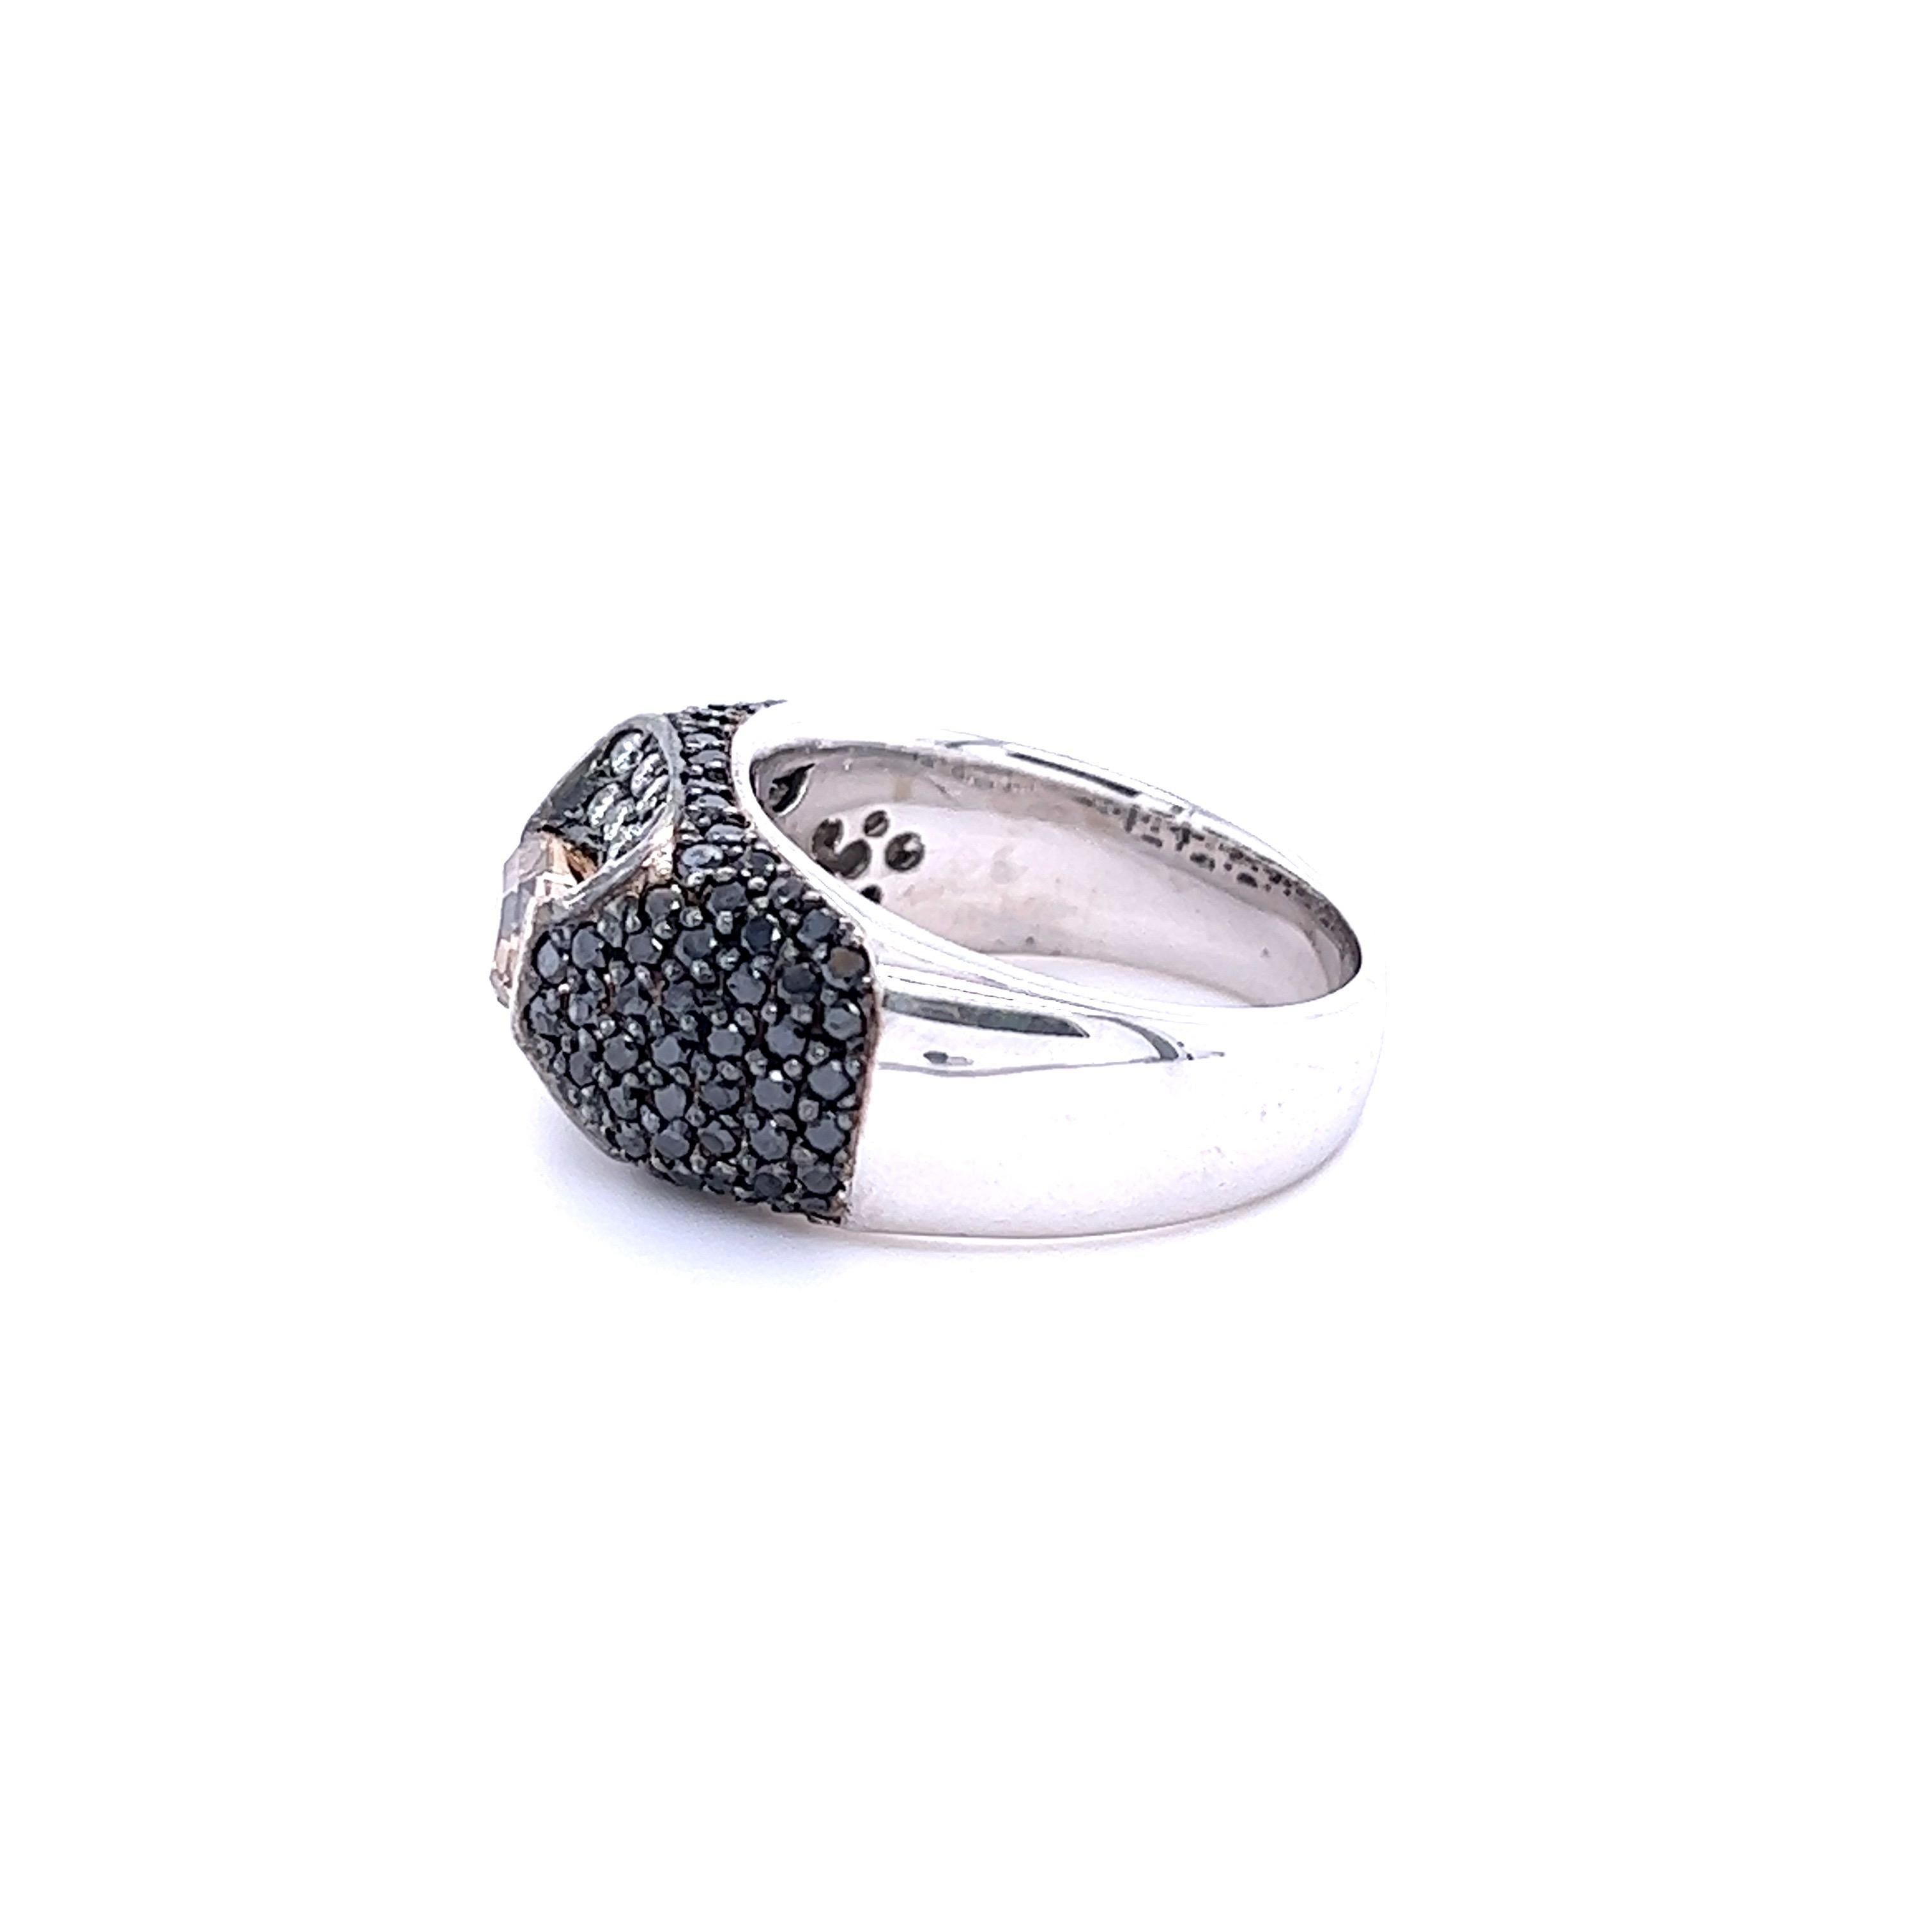 This cocktail ring has a 1.27 carat Oval Cut Natural Champagne Diamond that measures at approximately 7 mm x 5 mm. It is surrounded by 18 Natural Round Cut White Diamonds that weigh 0.31 carats and 96 Natural Round Cut Black Diamonds that weigh 1.18